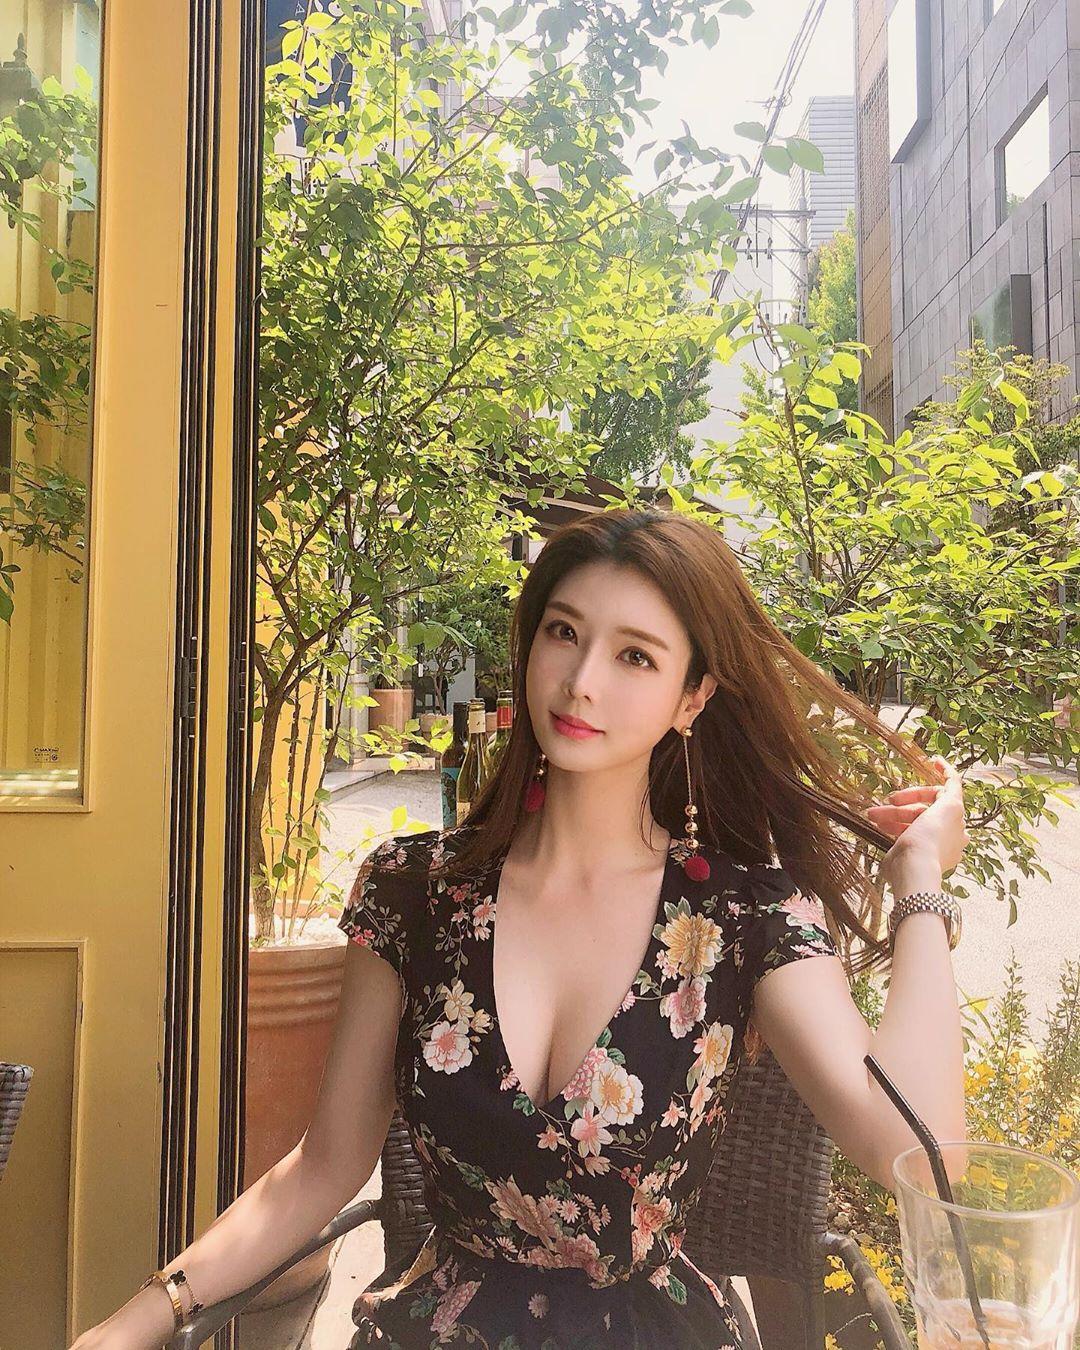 Korean Chaozheng blogger, with hot and sexy figure